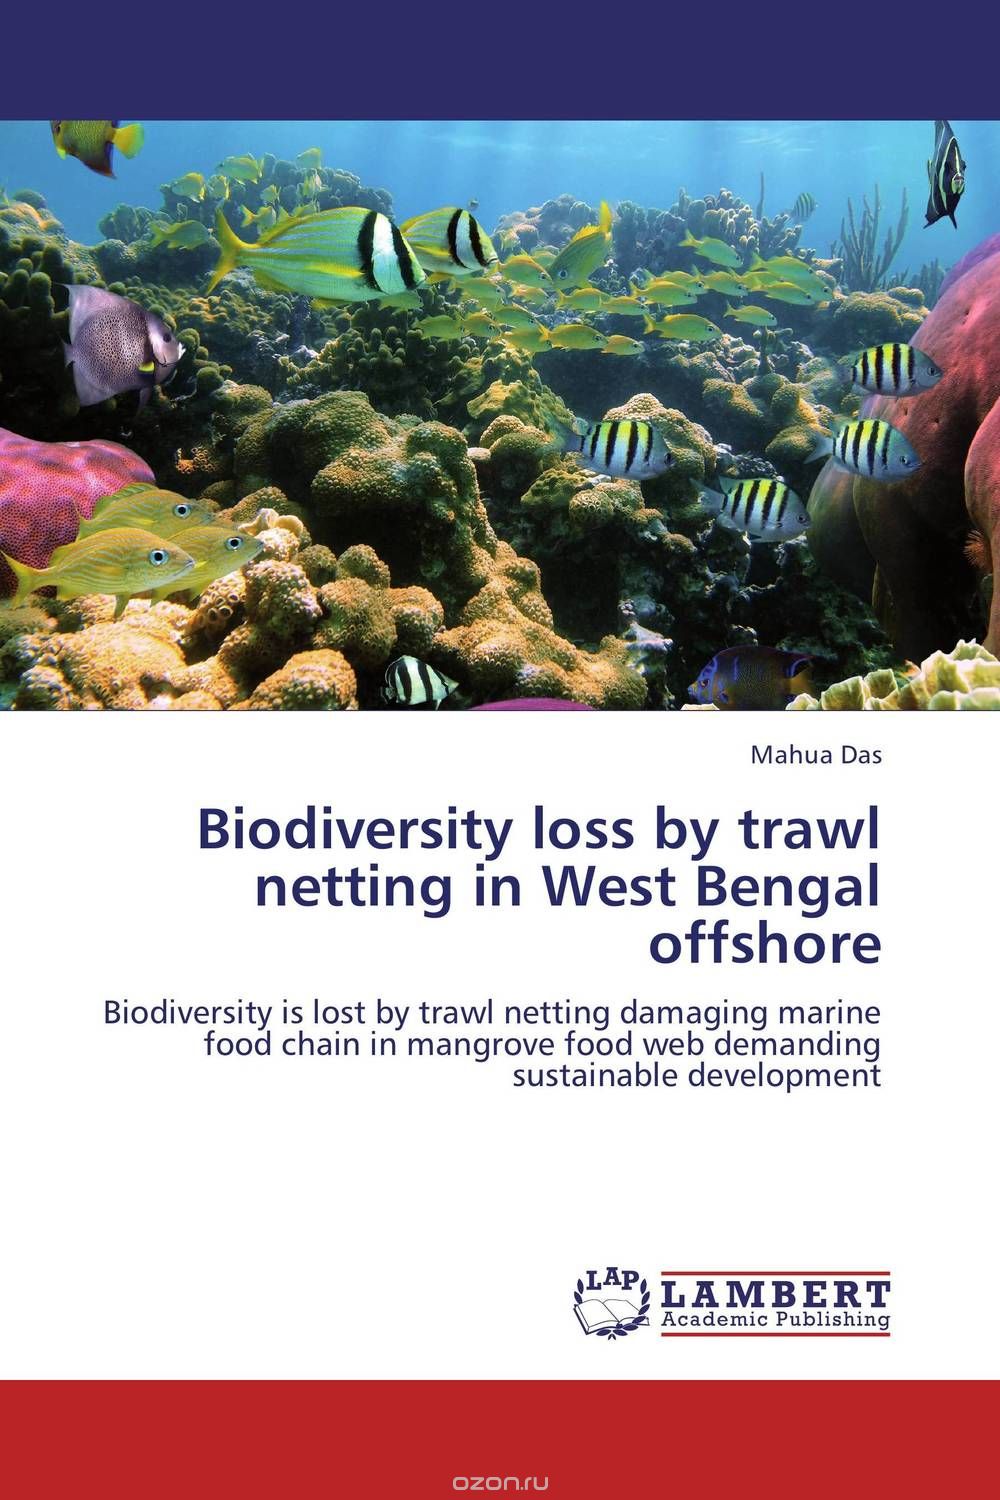 Biodiversity loss by trawl netting in West Bengal offshore